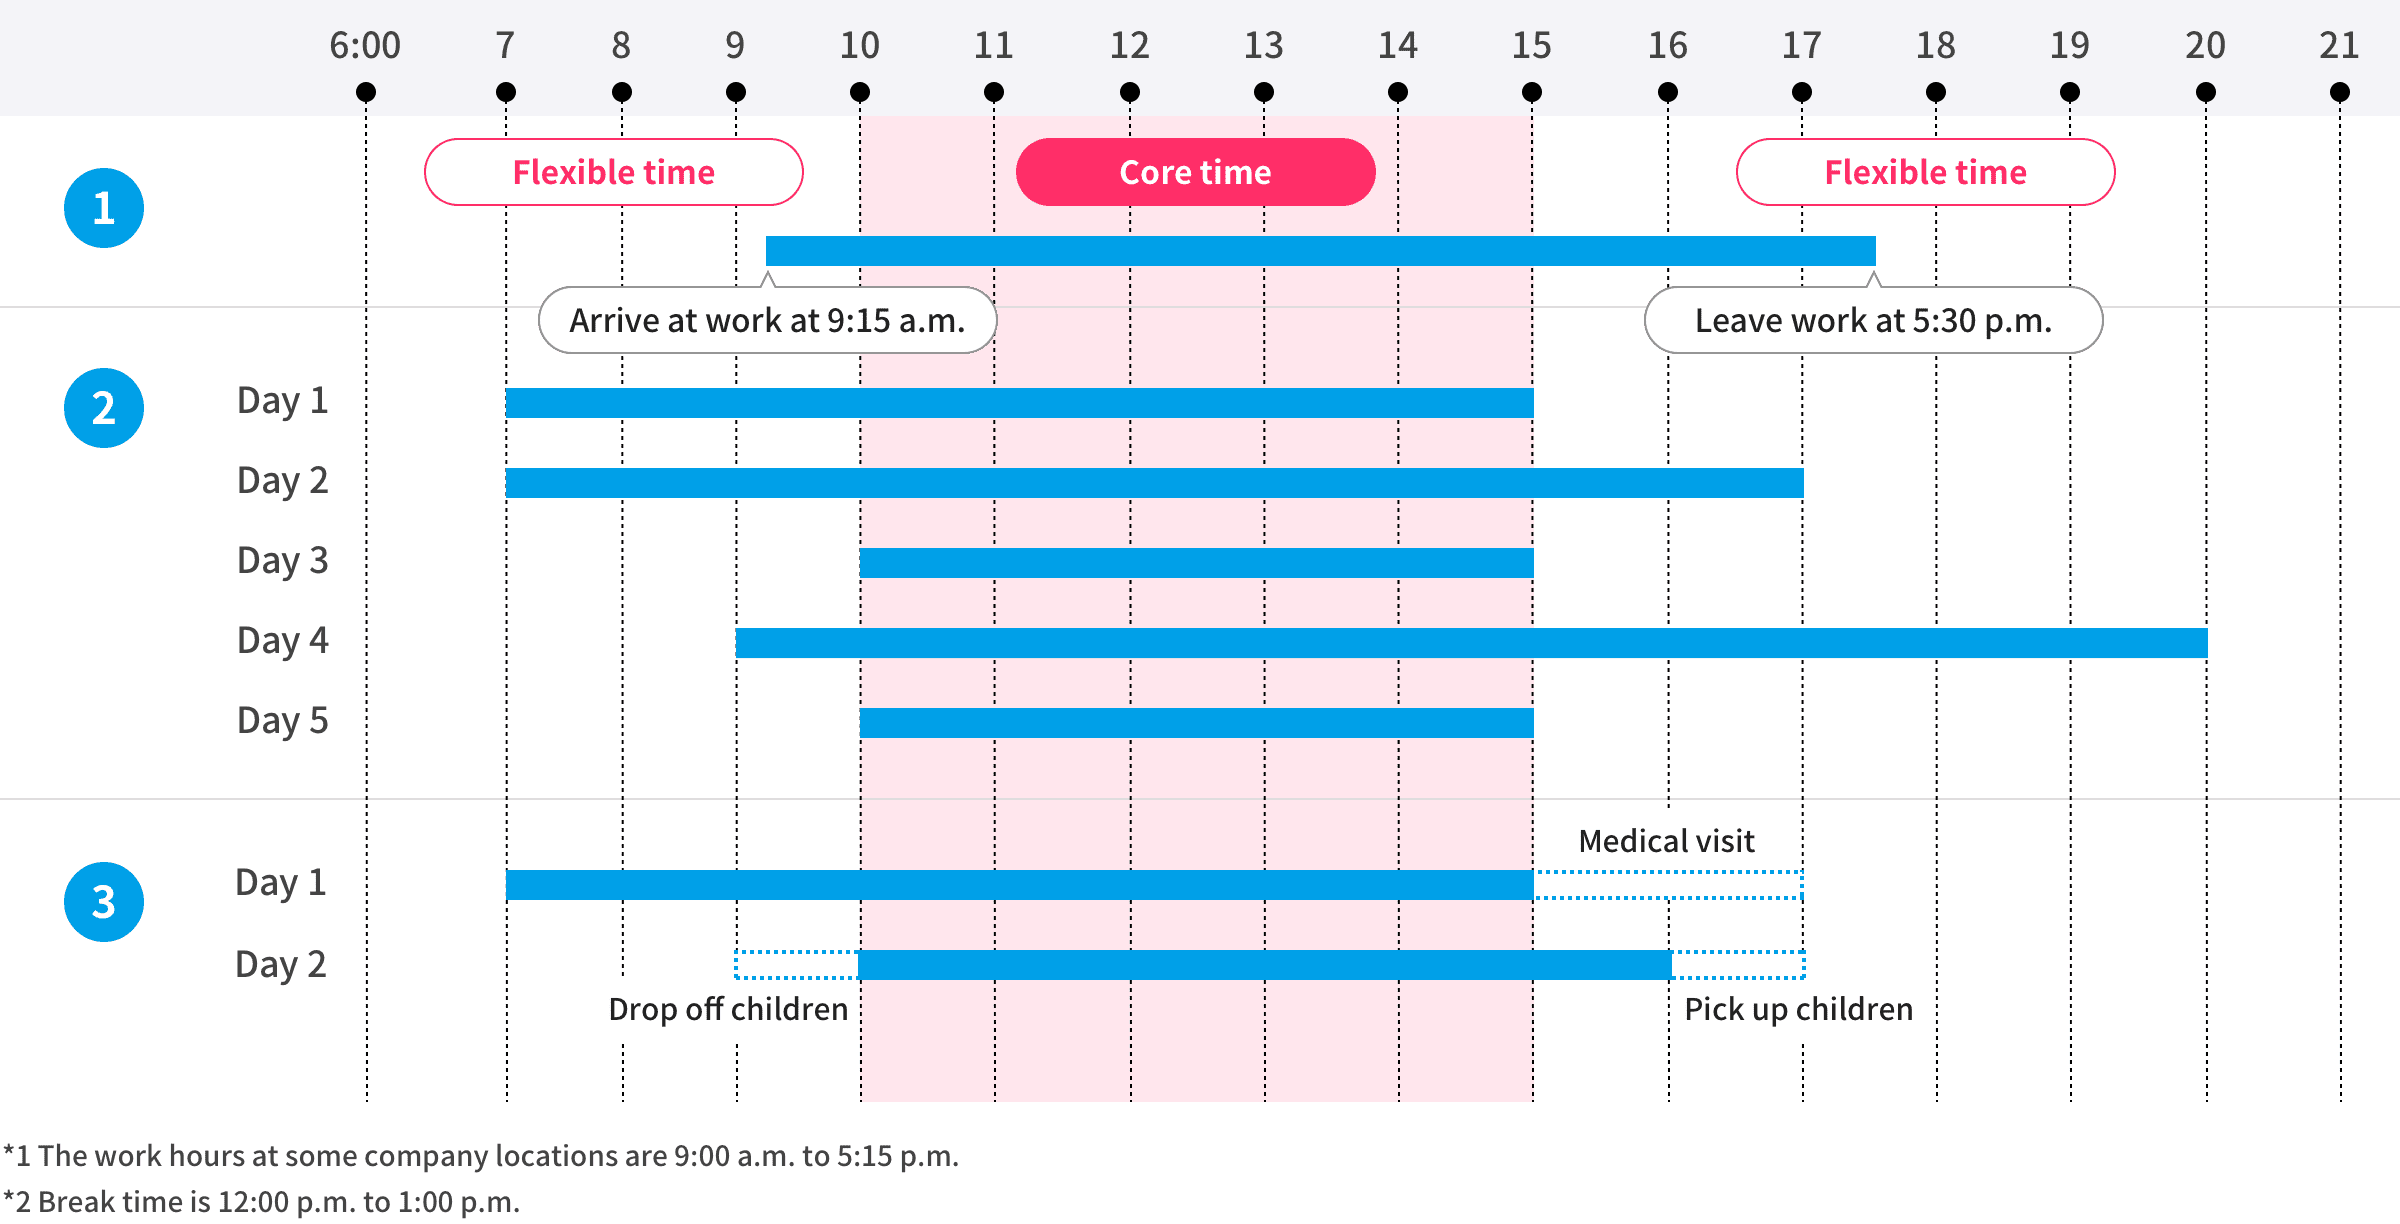 Usage example of the flextime system